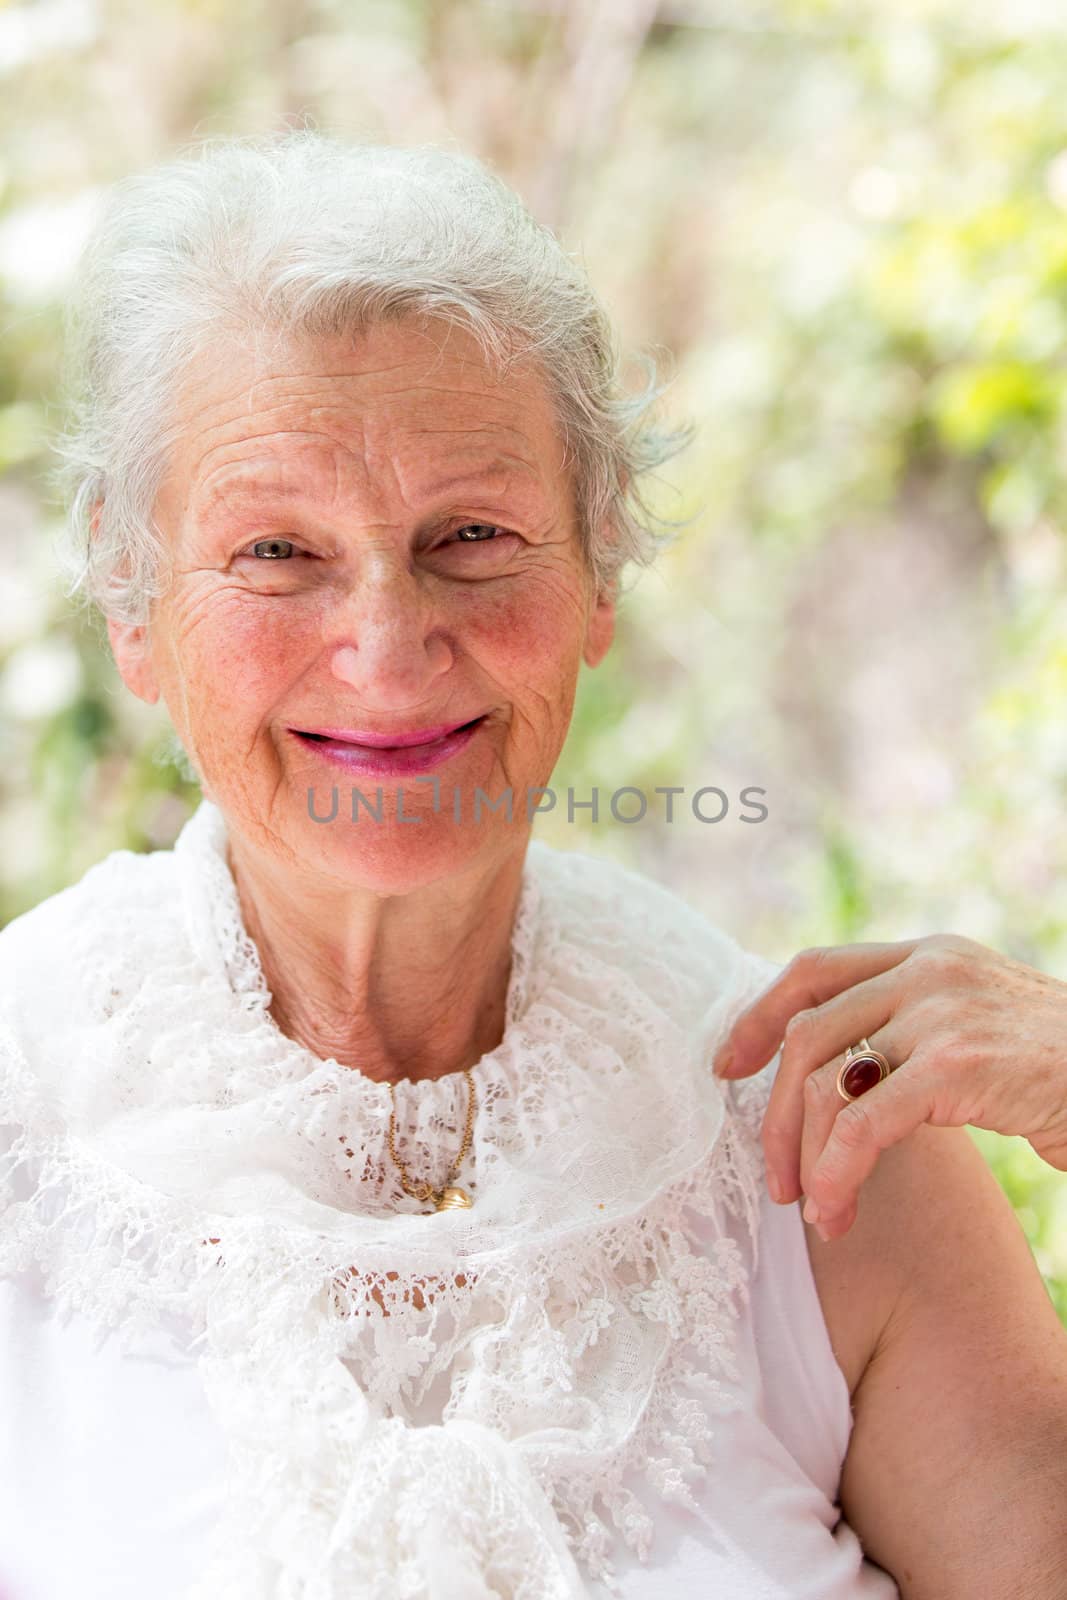 Grandmother still looking at you positively with her white hair and complimenting nice clothing.